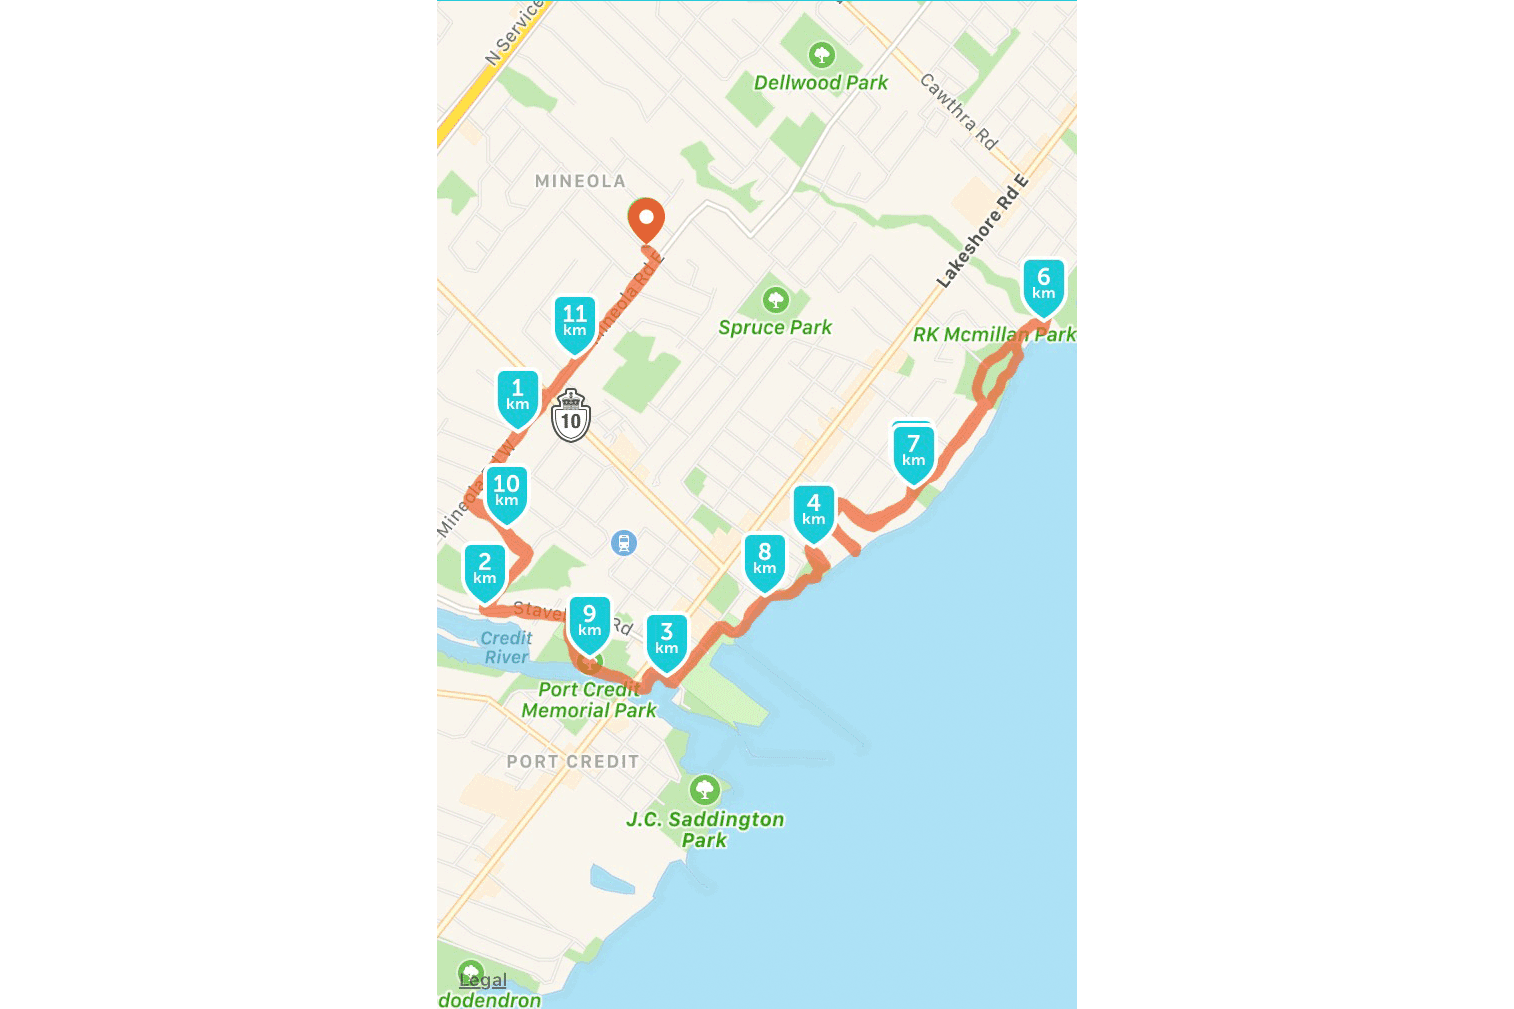 This is a little longer than my first actual Port Credit run, done later in the summer when I'd learned how to use running apps.